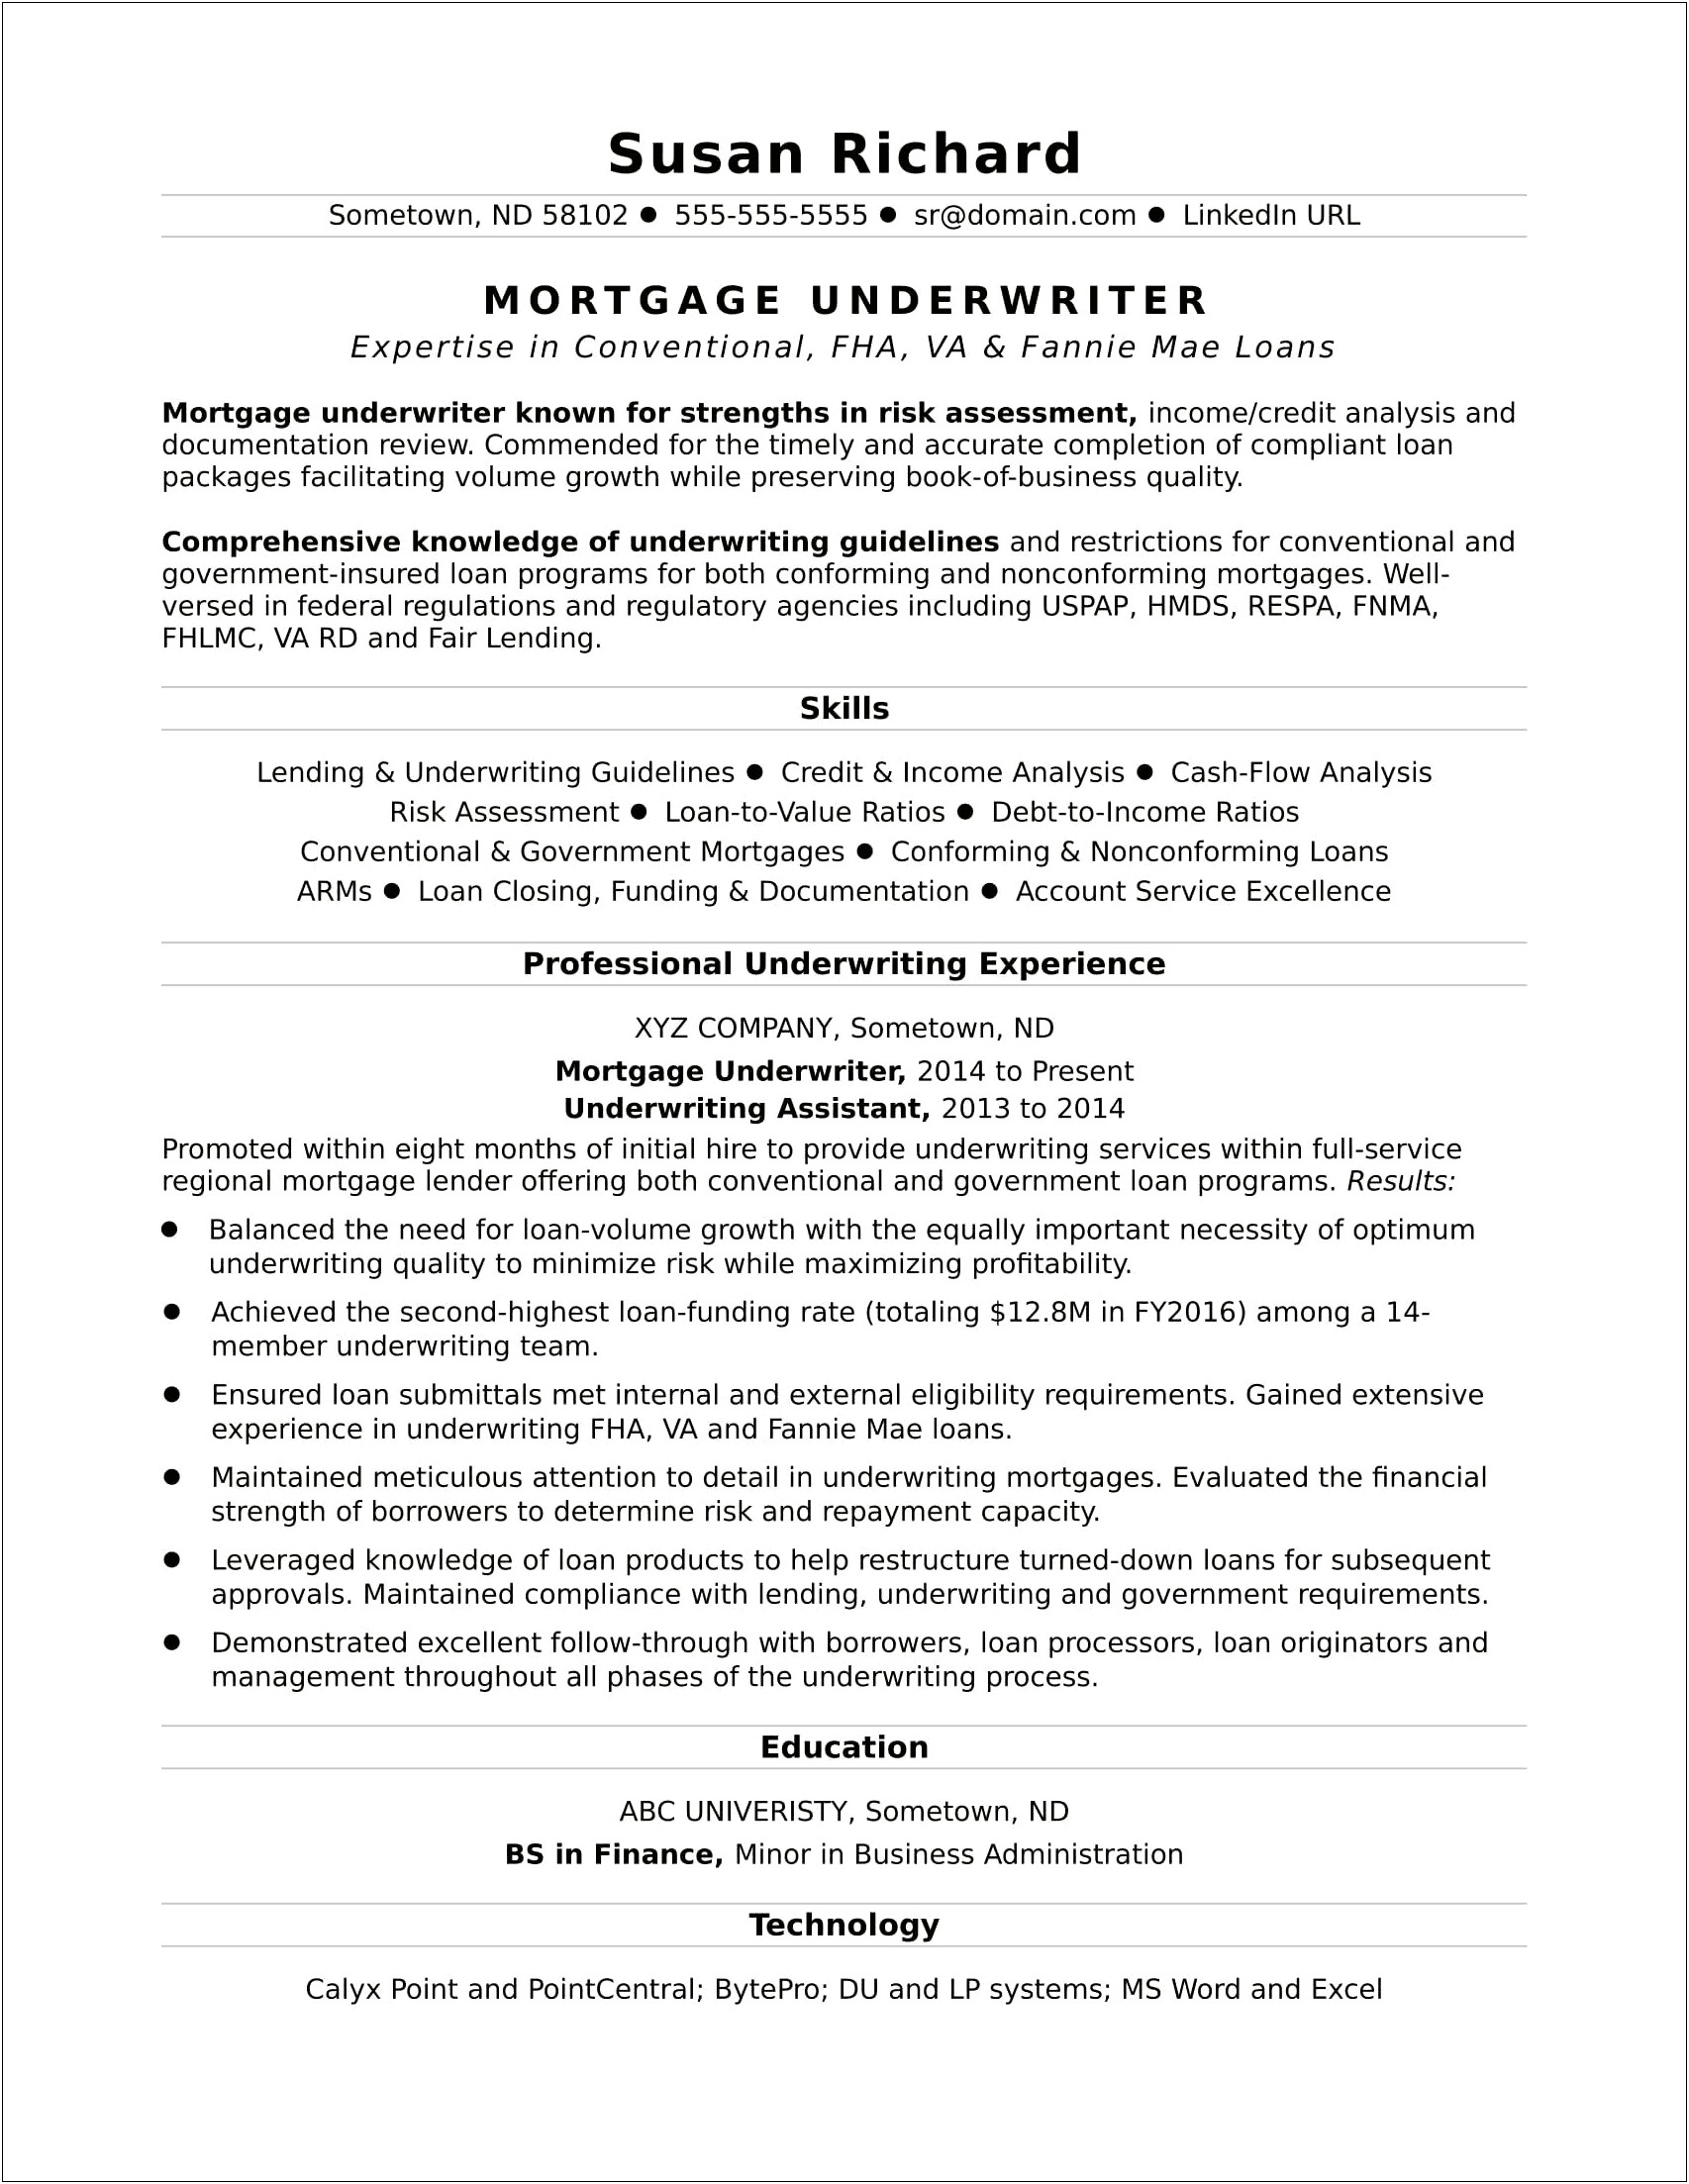 Resume Examples For Government Credit Card Analyst